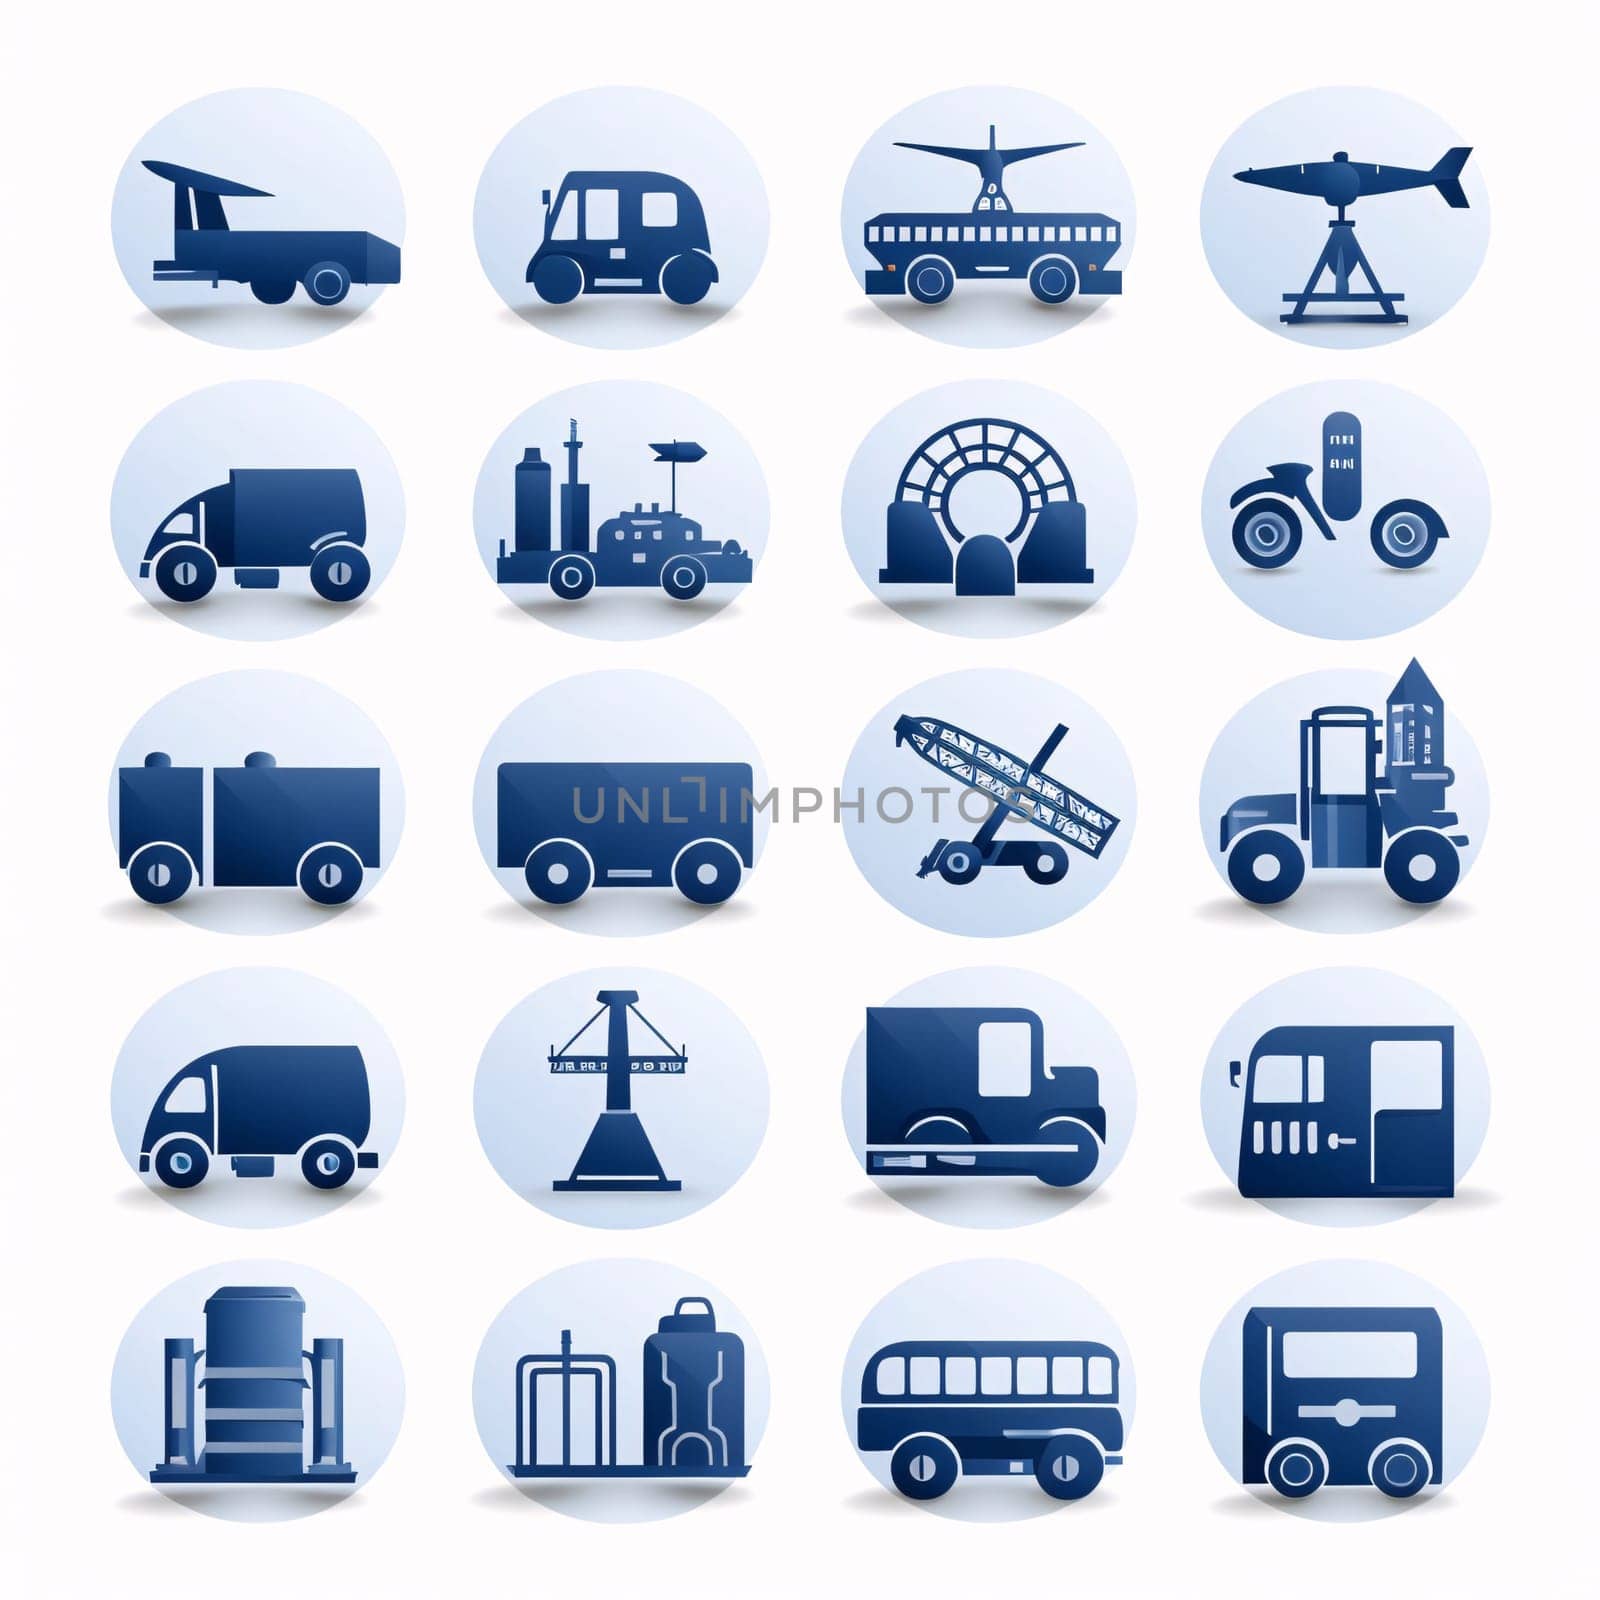 New icons collection: Transport icons set. Vector illustration. Blue round stickers with long shadow.